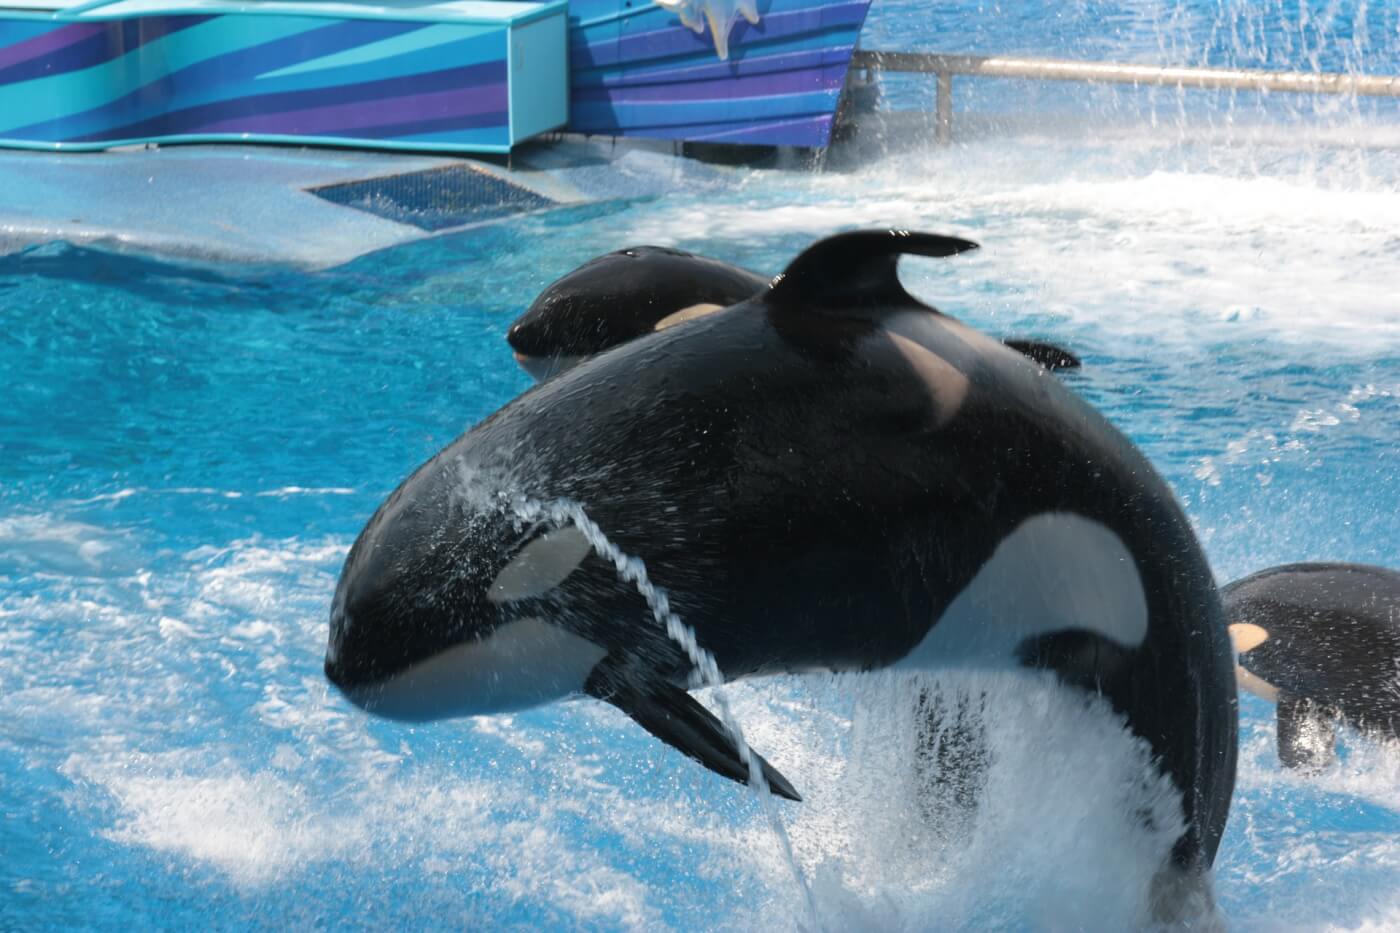 A group of orca whales jumping out of the water in SeaWorld during a spectacular July show.